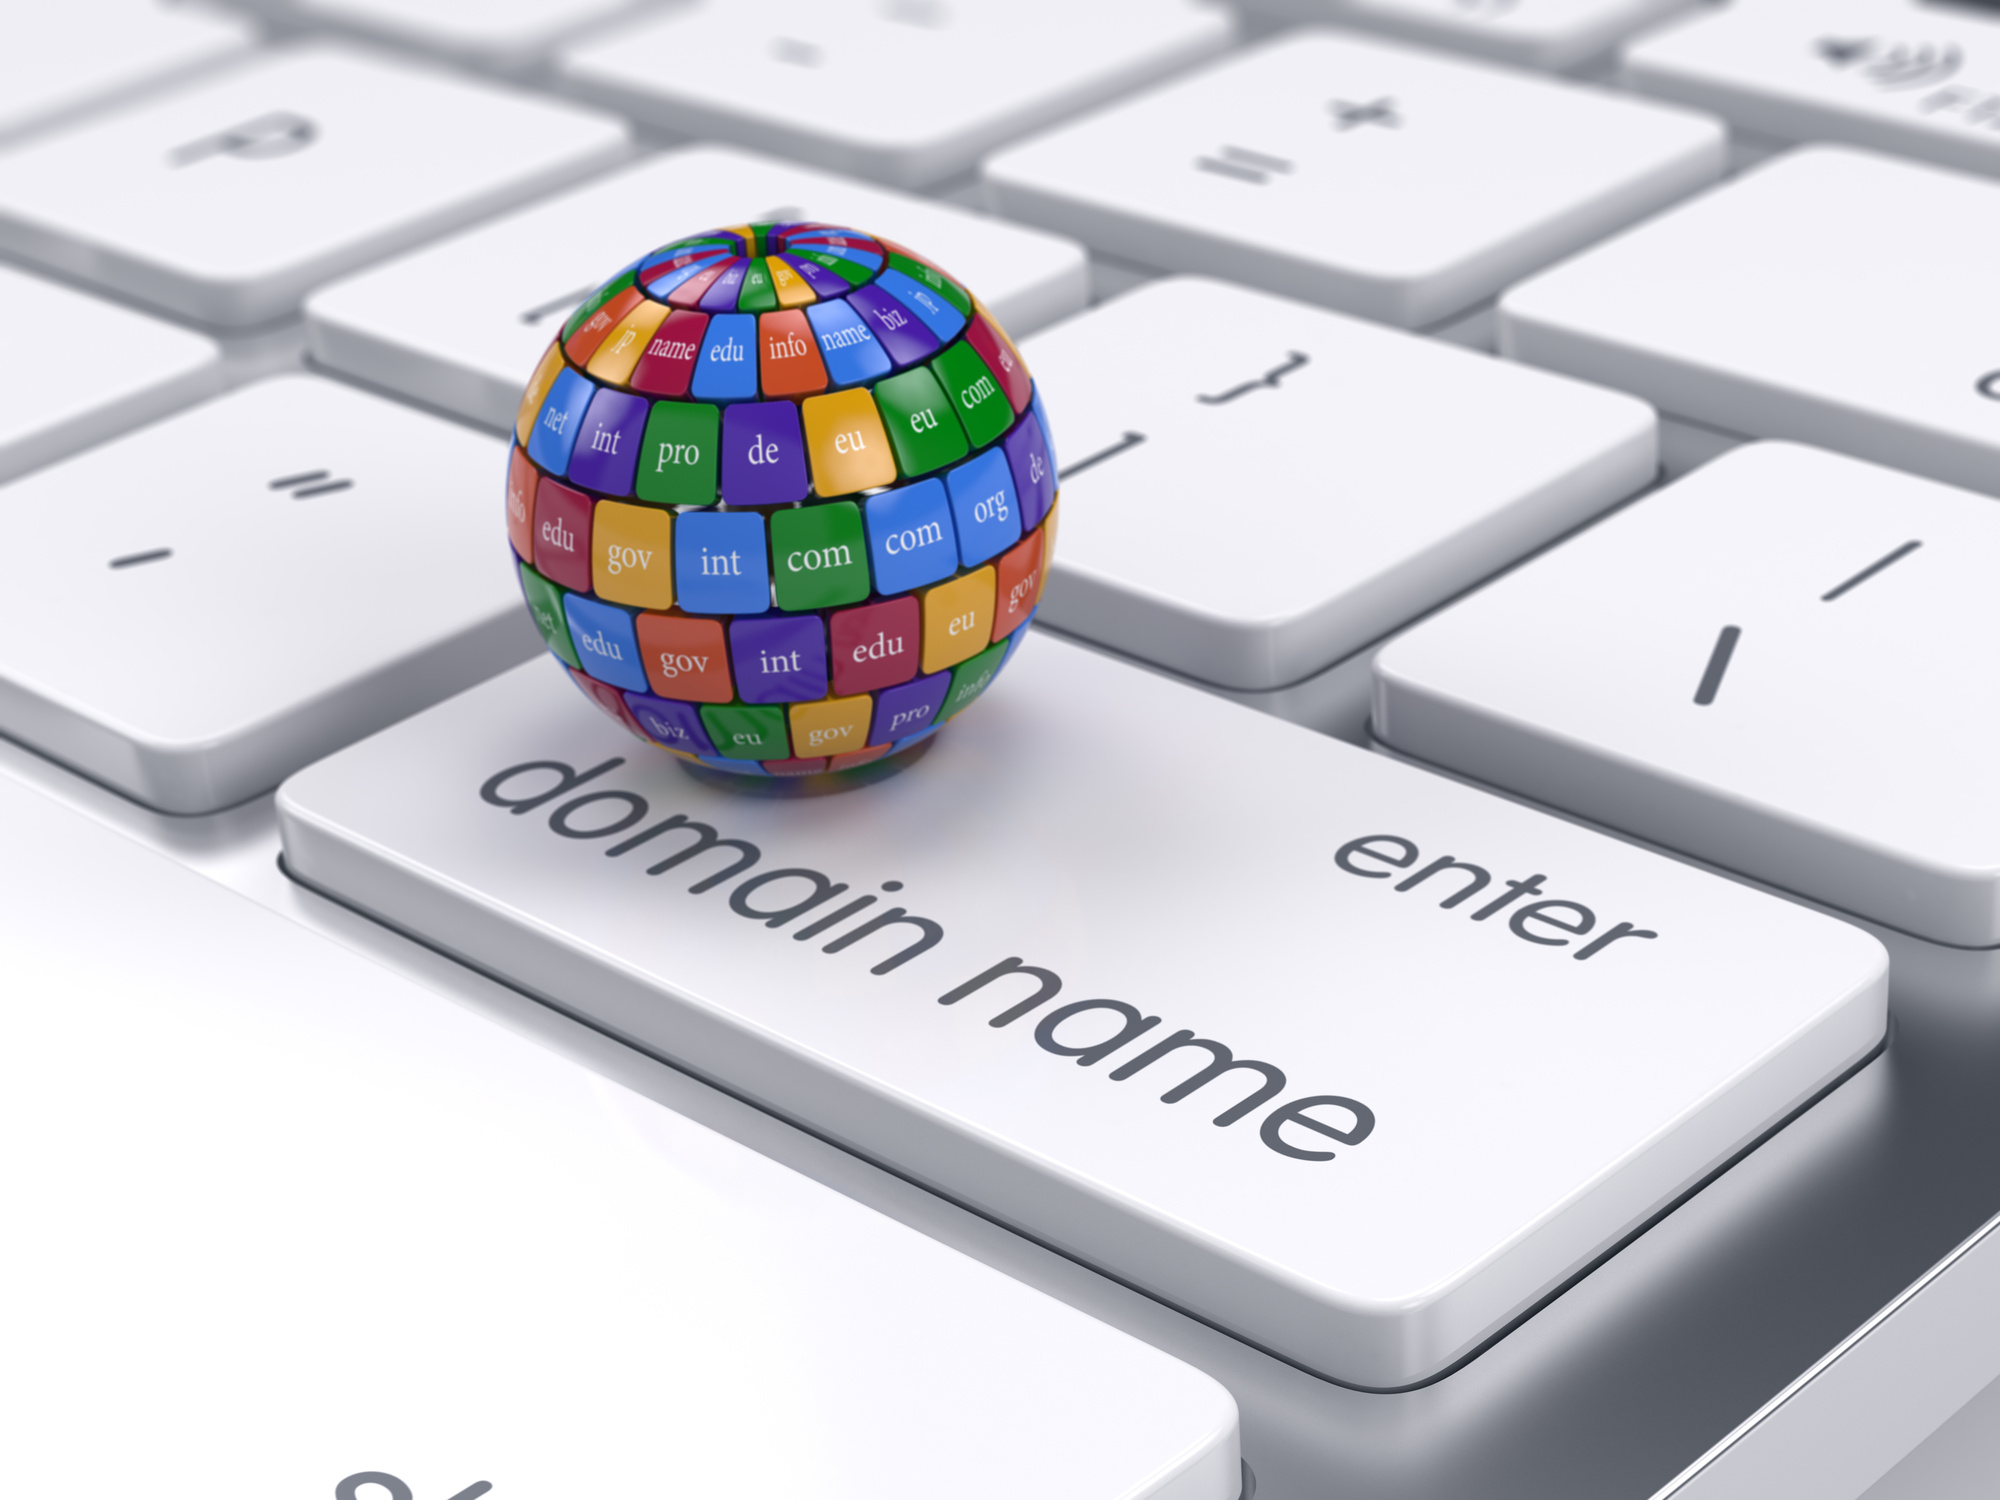 Bad Domain Names: What Types of Domain Names Should You Avoid Using? | WebConfs.com